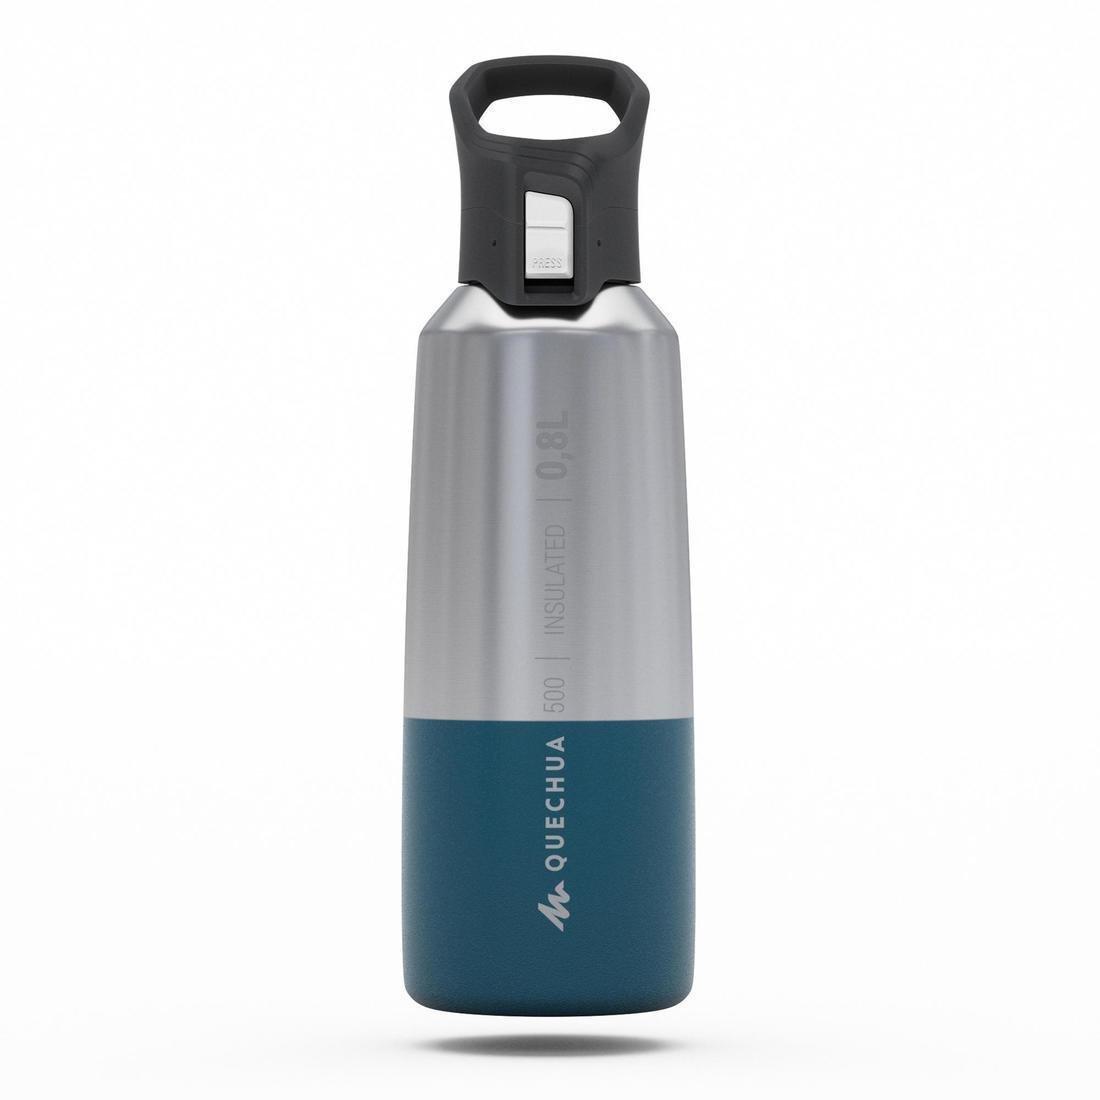 QUECHUA - Insulated Stainless Steel Hiking Flask - Mh500 0.8L, Blue